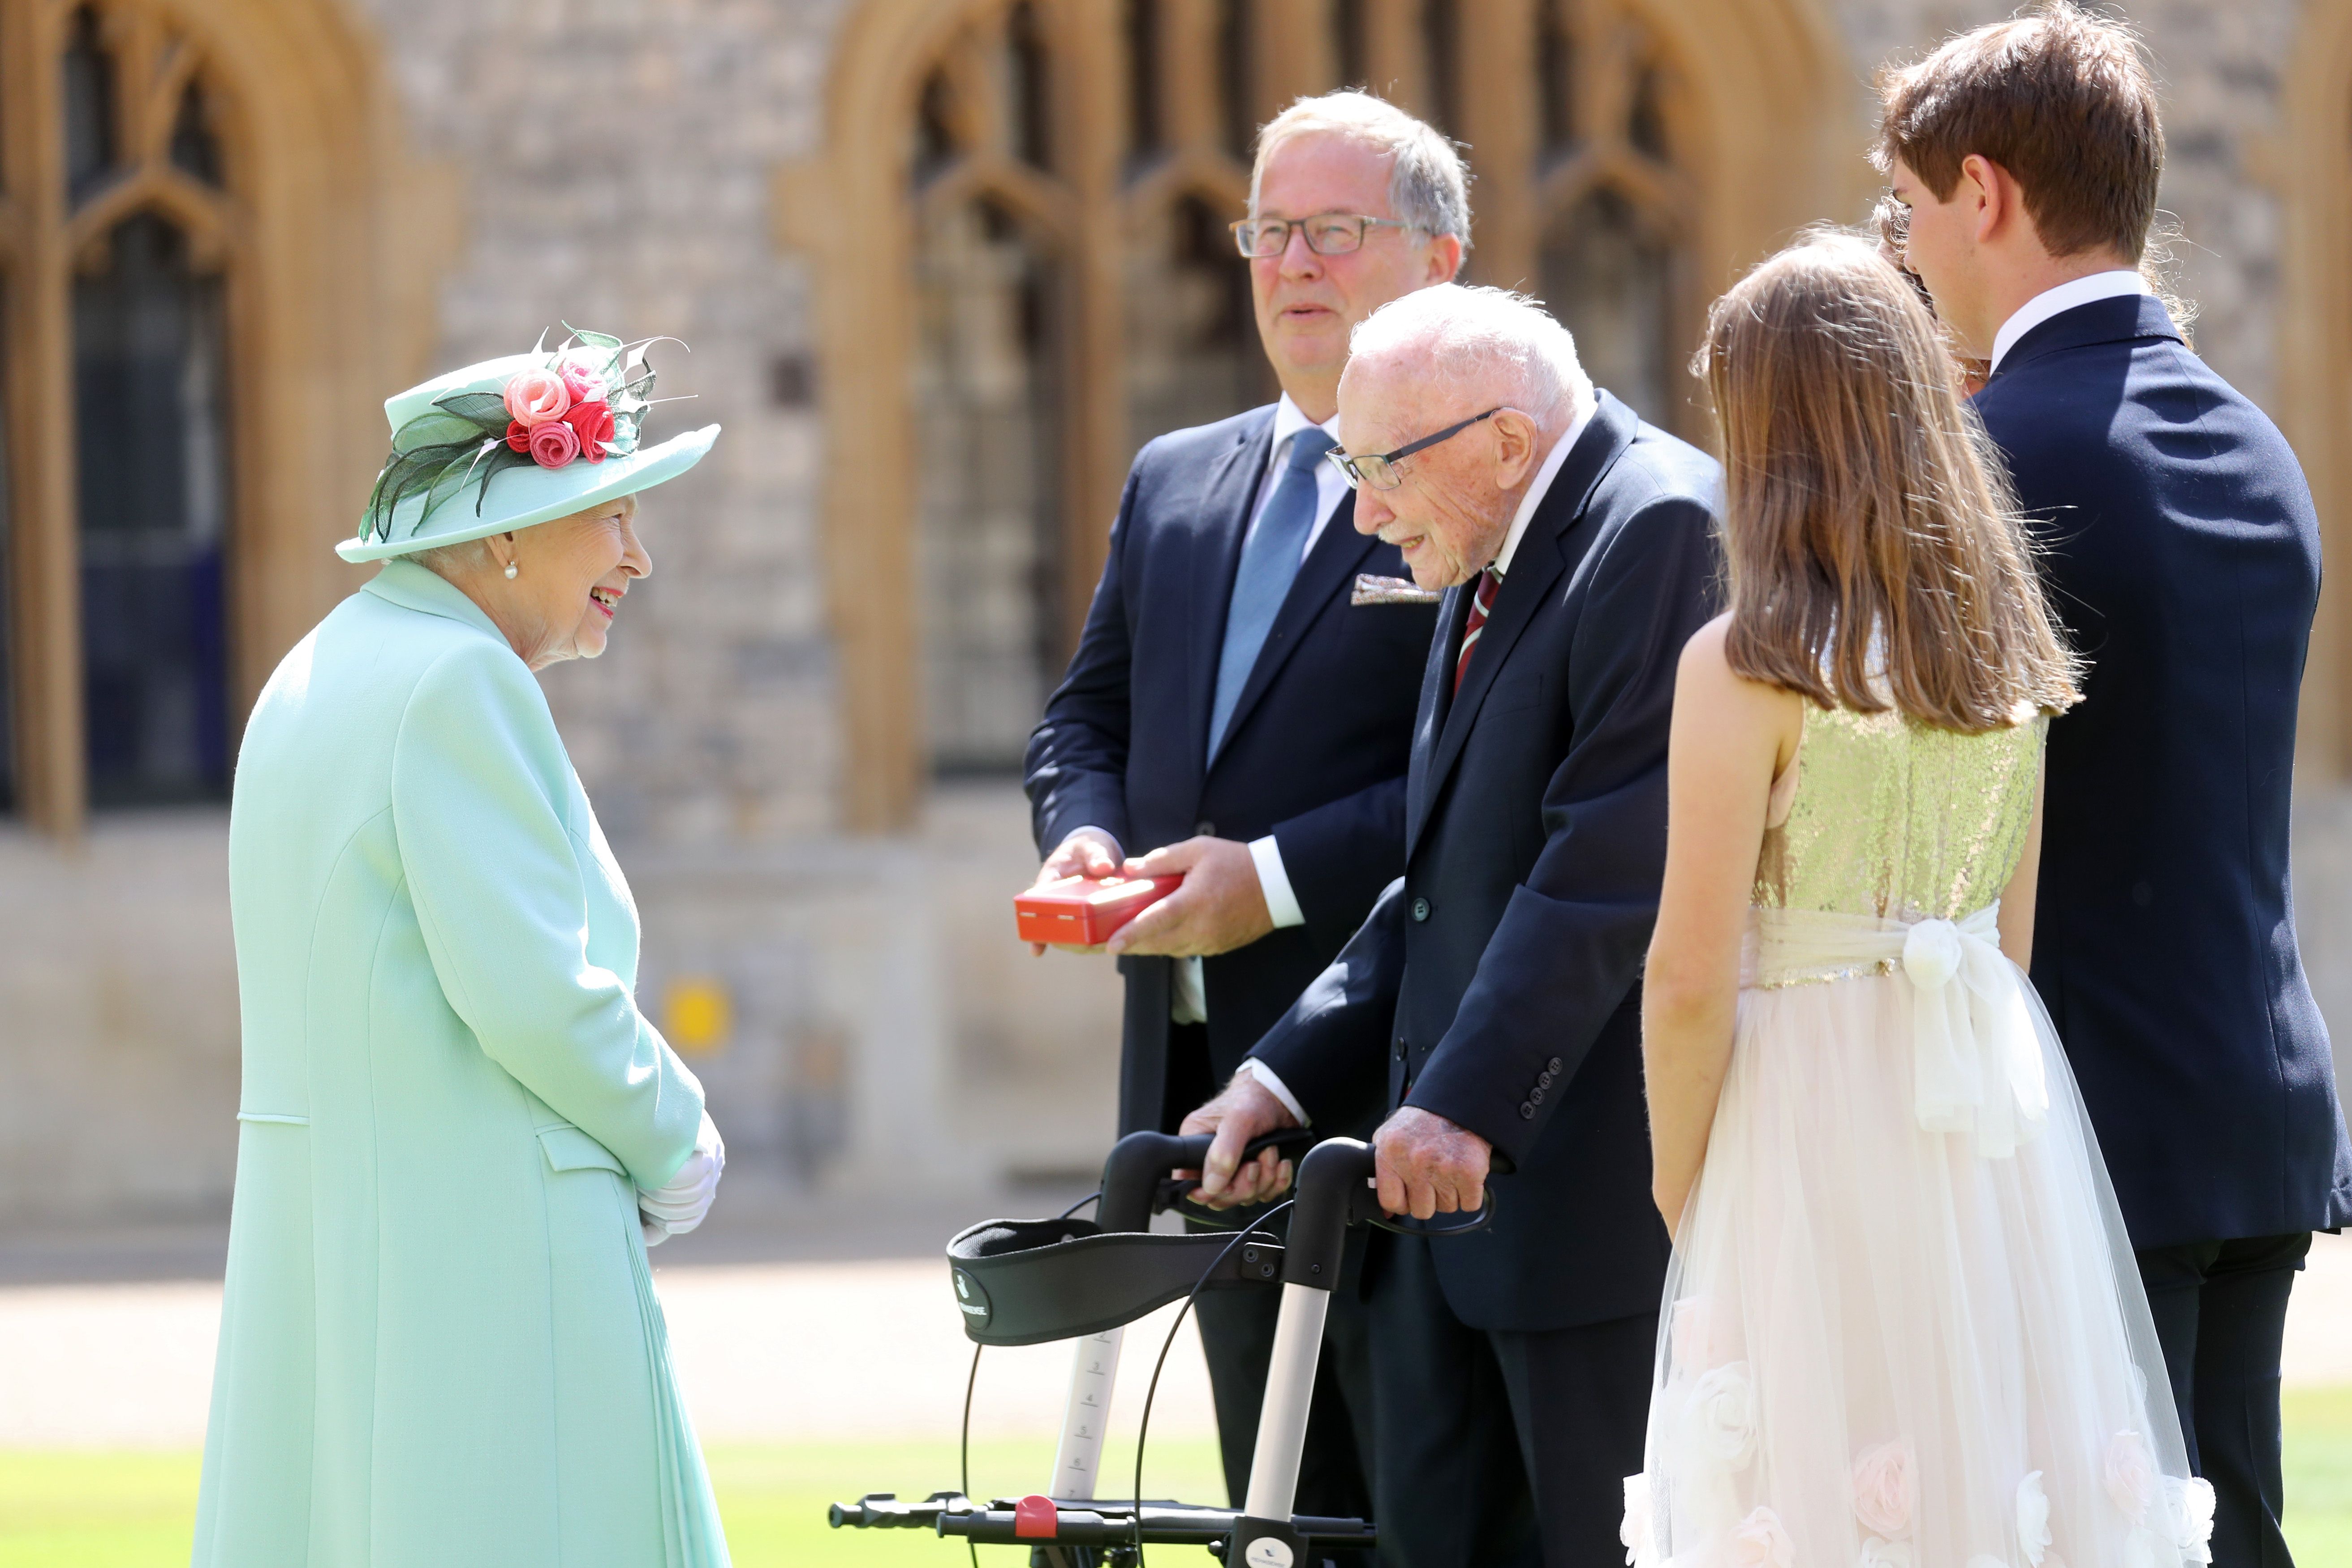 Queen Elizabeth II talks Captain Sir Thomas Moore and his family after awarding him with the insignia of Knight Bachelor at Windsor Castle on July 17, 2020 in Windsor, England. | Photo: Getty Images